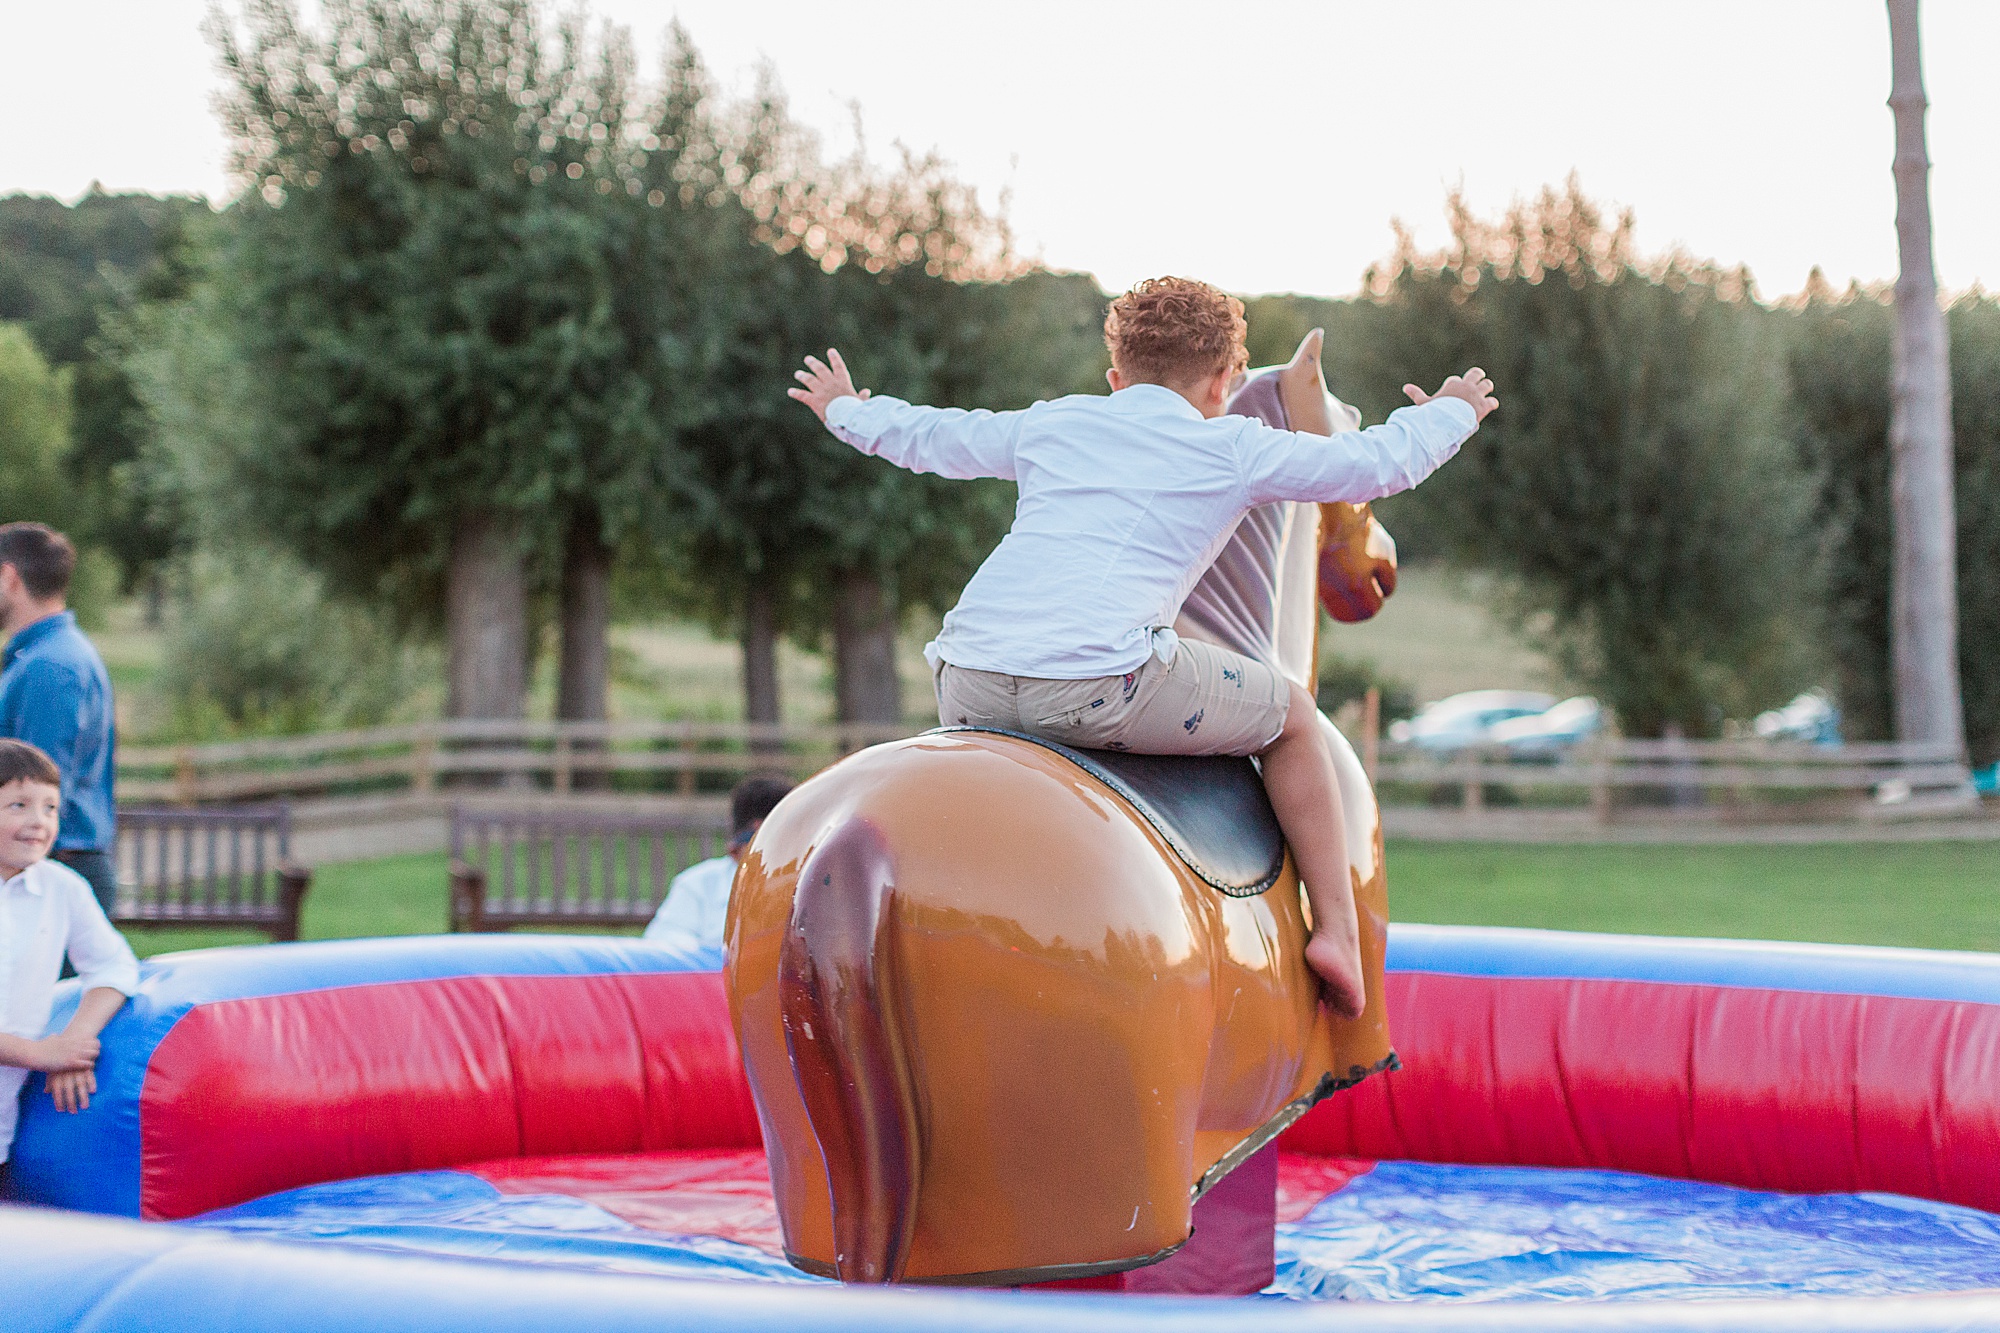 photo of a young wedding guest riding a mechanical rodeo pony outside at a wedding reception with guests watching. the boy has his arms outstretched